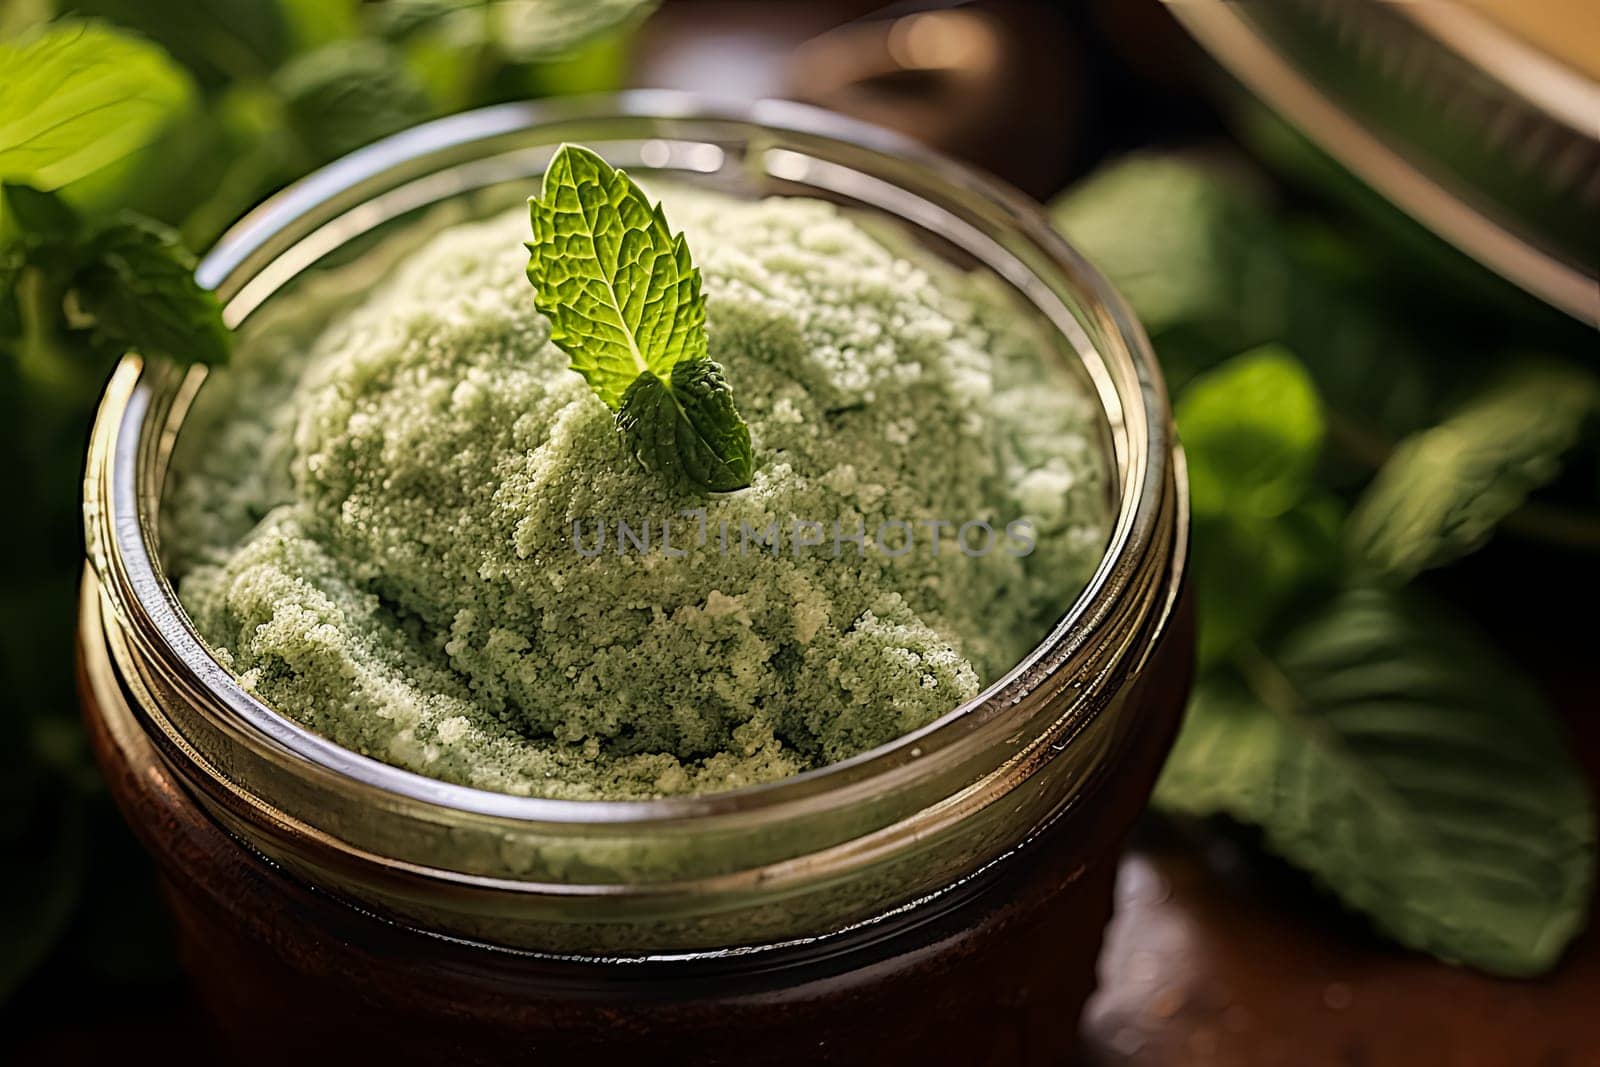 A jar of sugar scrub with peppermint sits on the table surrounded by herbs and mint, representing natural body care.